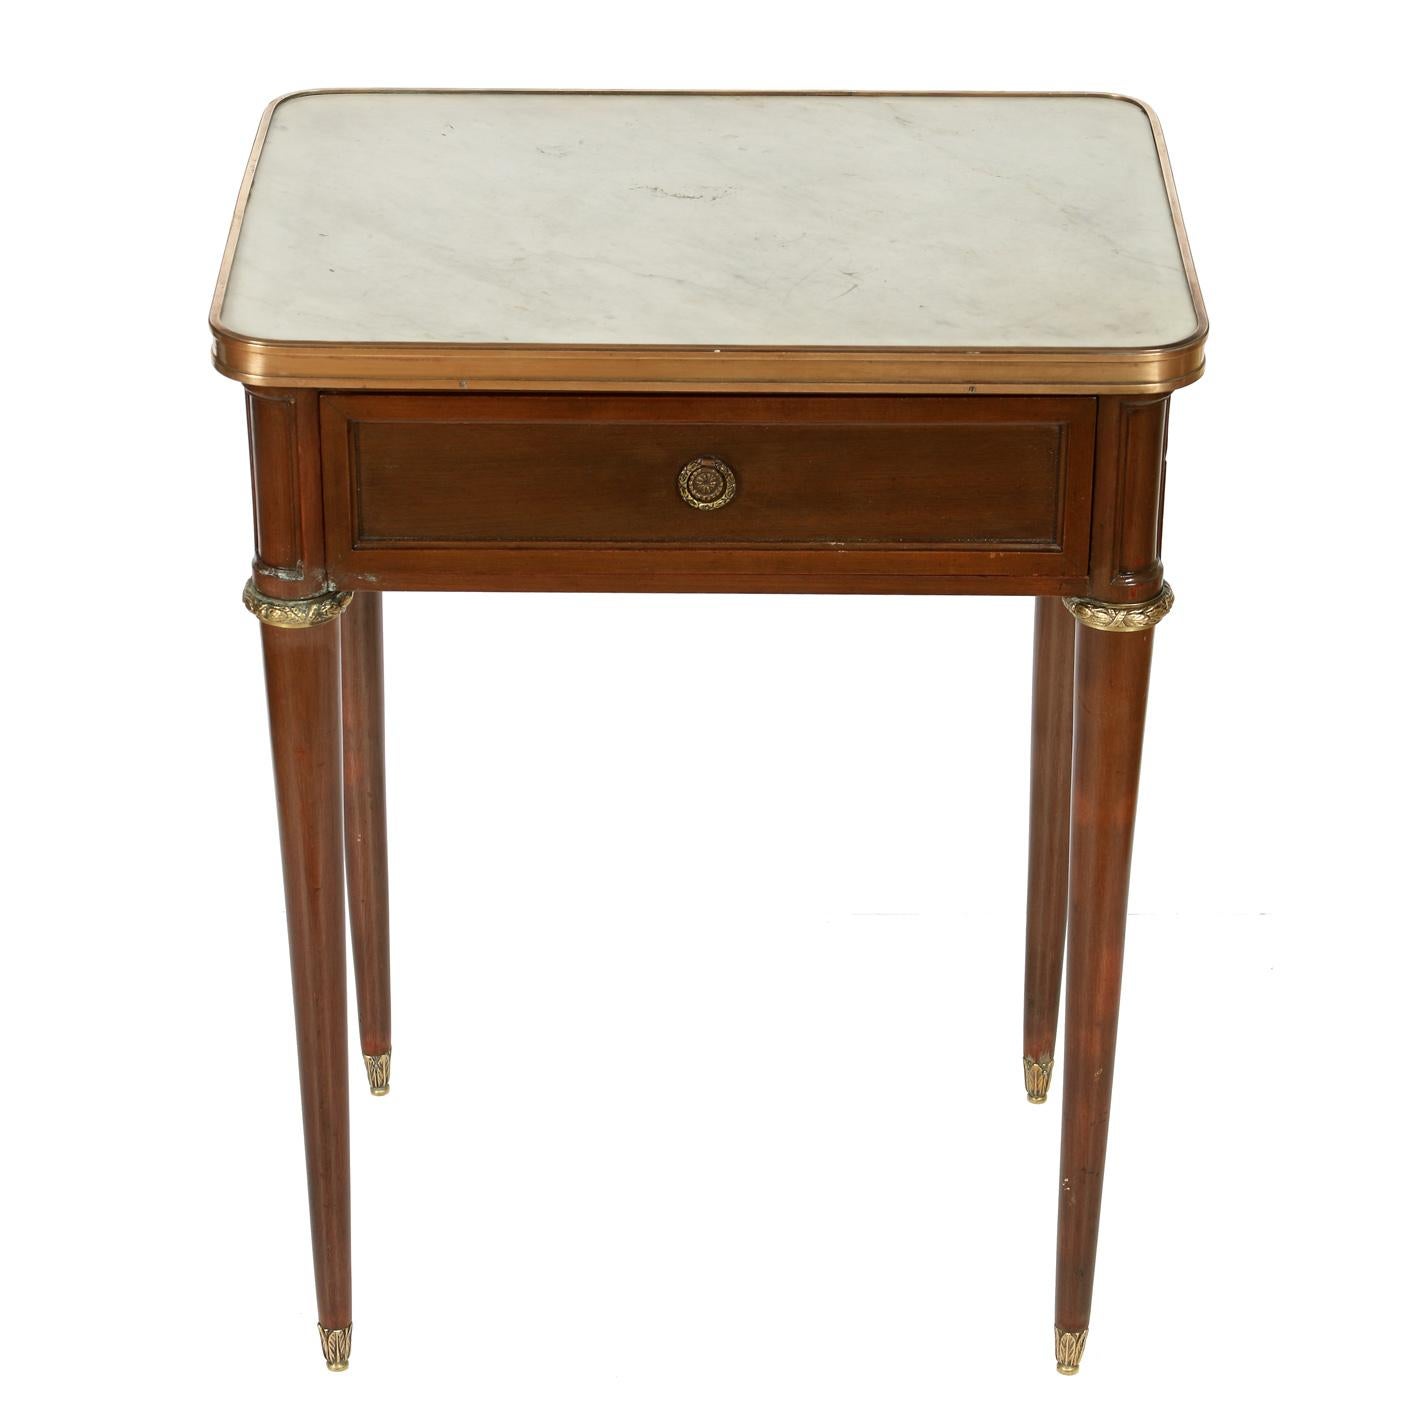 A pair of mahogany nightstands with marble tops, single drawer, brass fittings and round tapered legs.